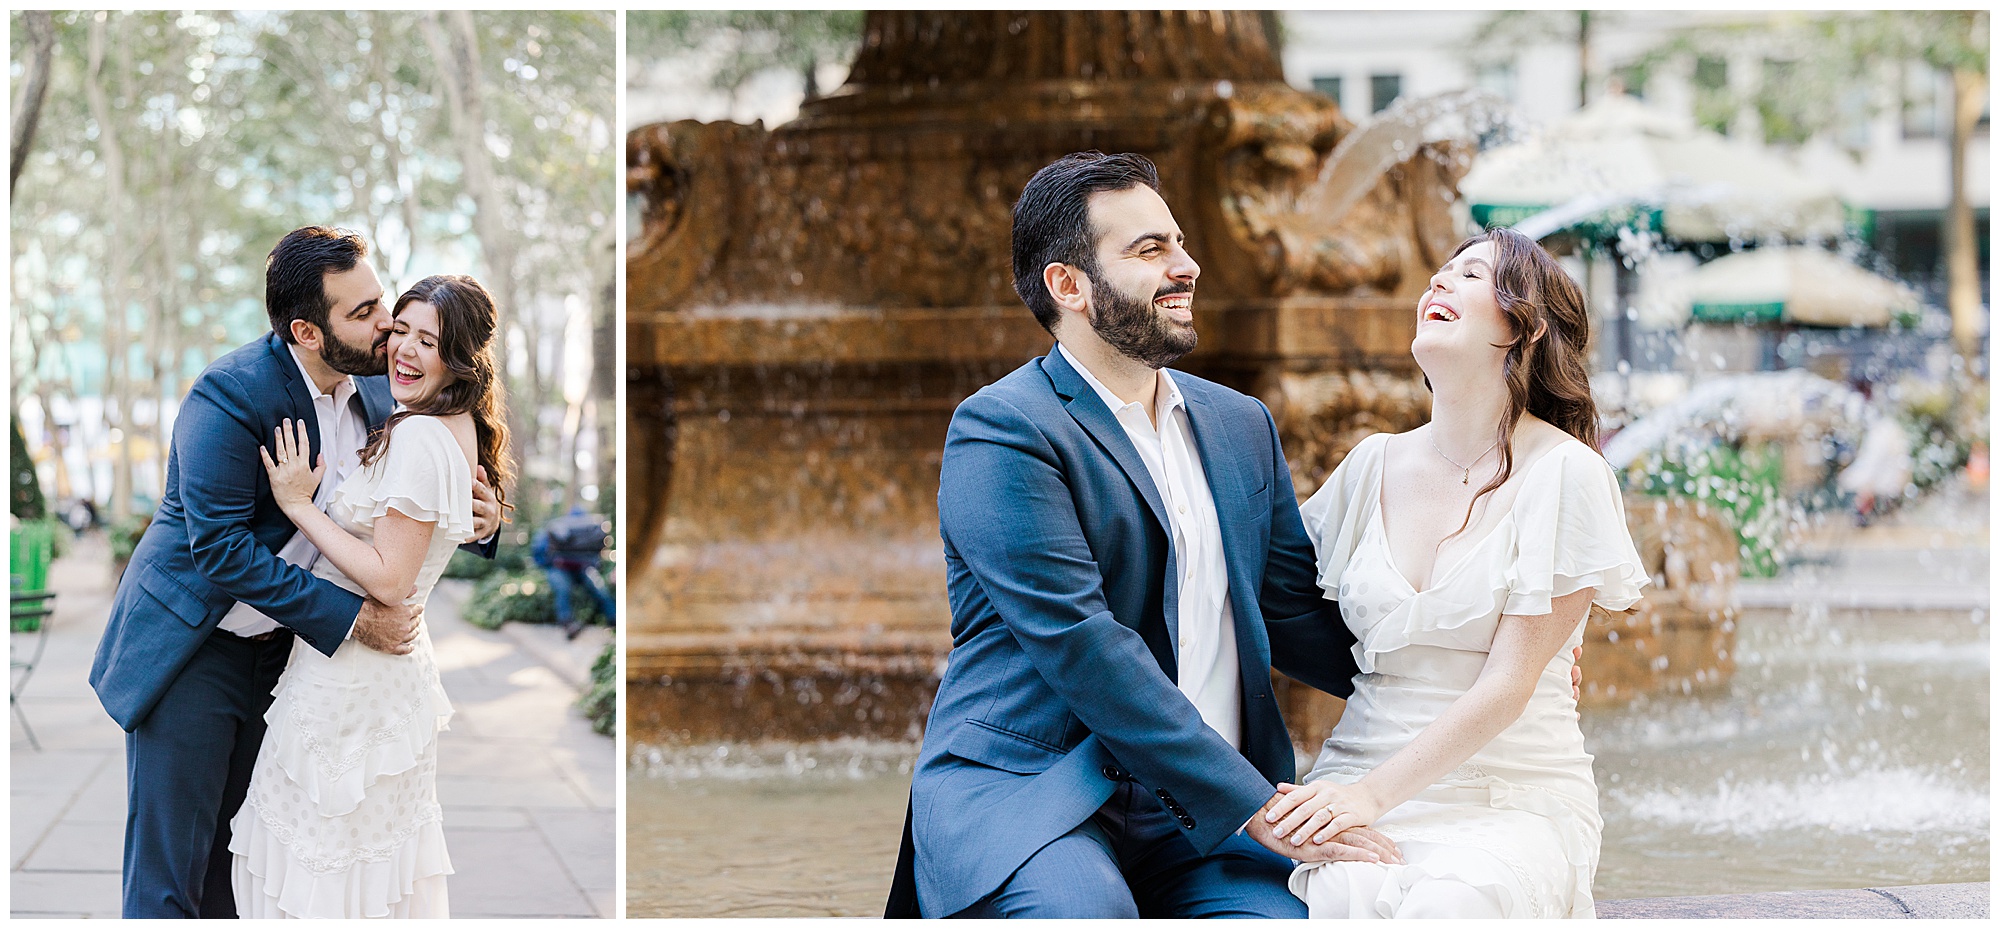 Stand-Out NYC Wedding Photographers